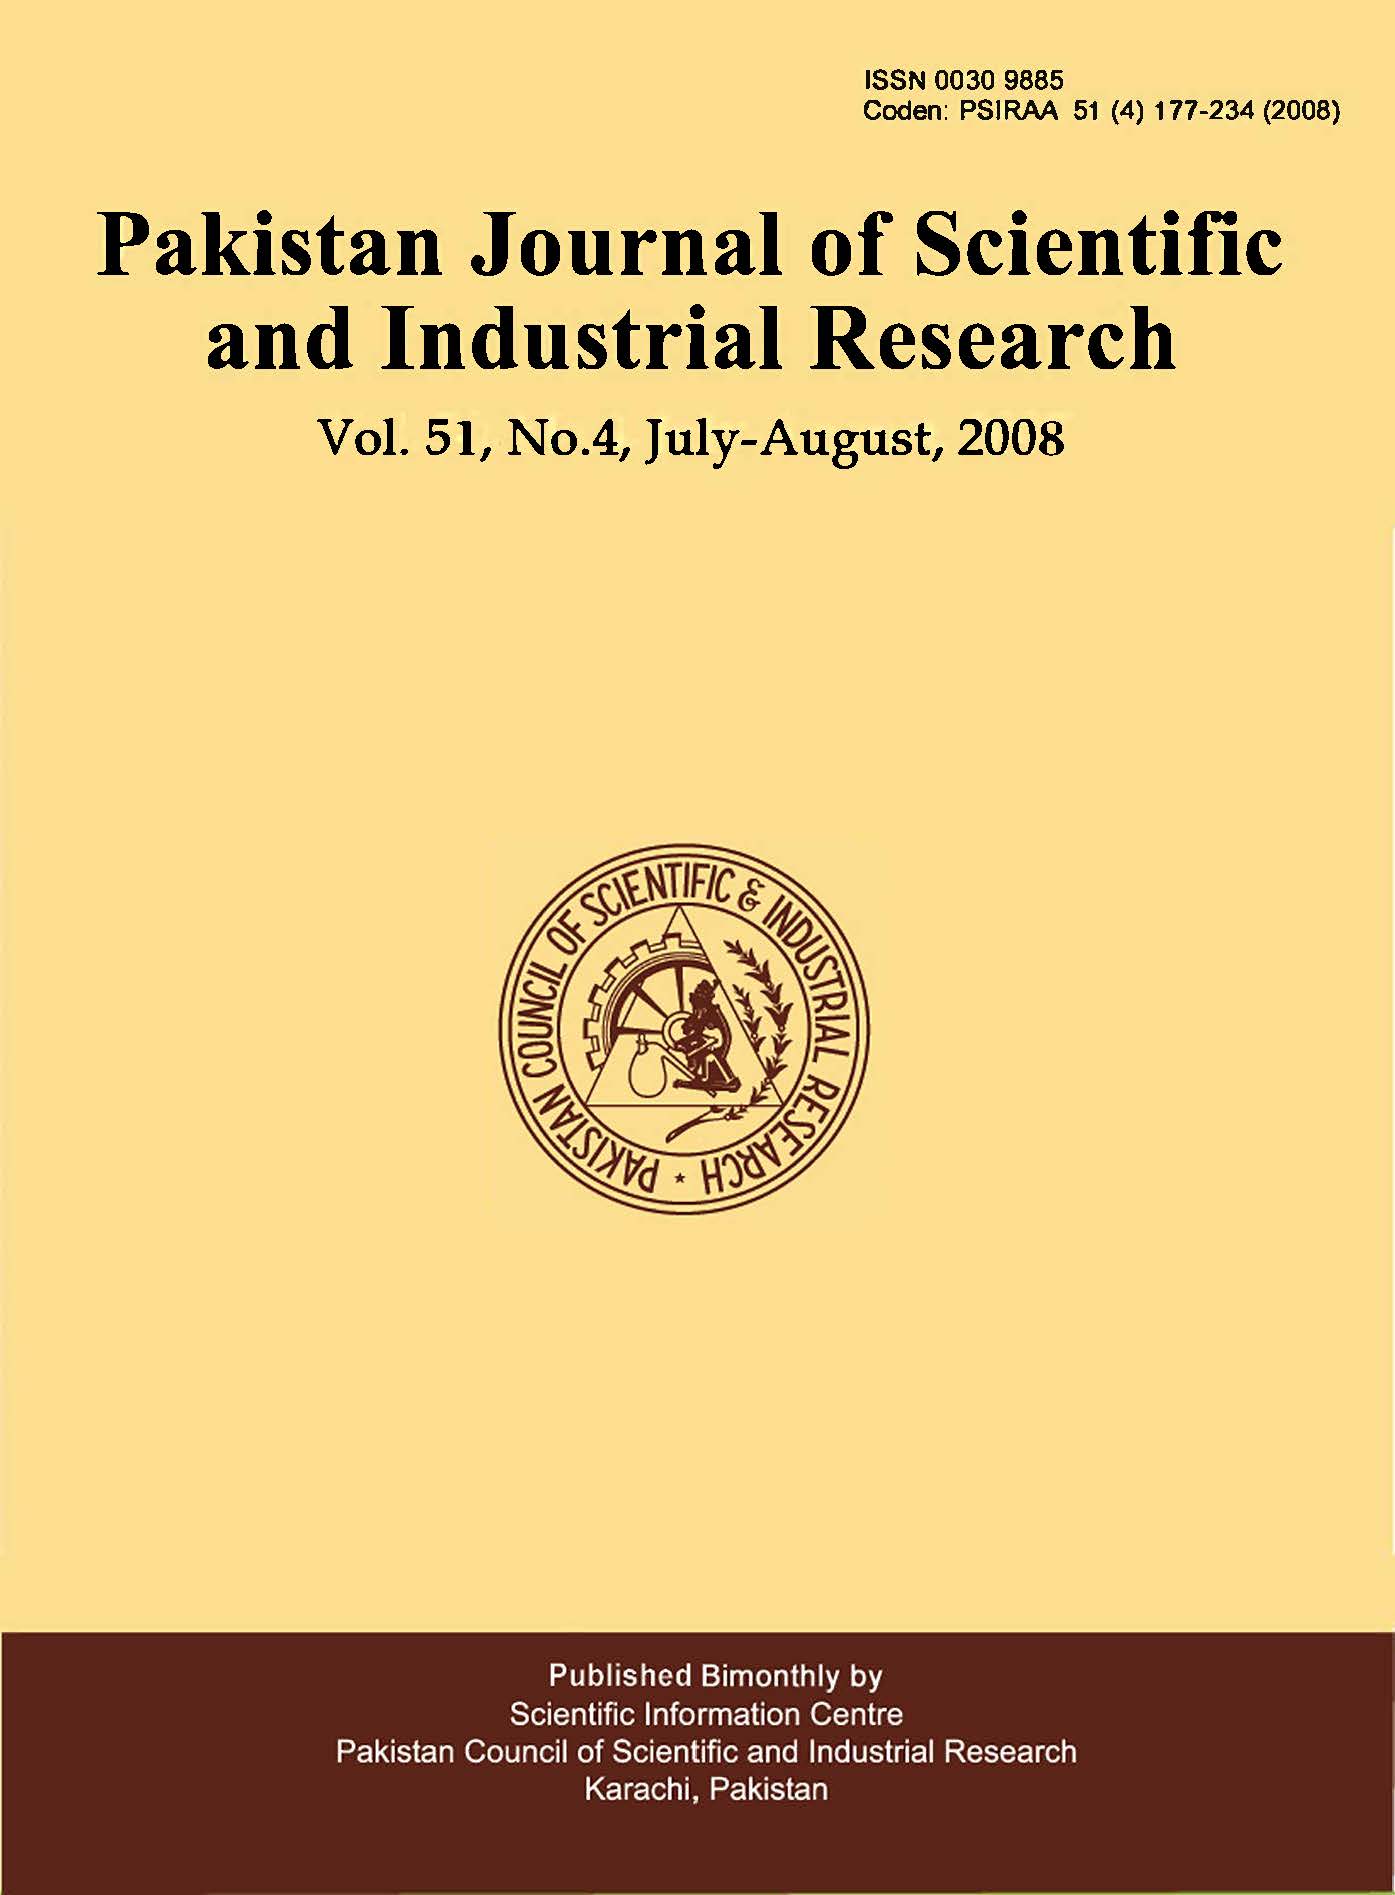 					View Vol. 51 No. 4 (2008): Pakistan Journal of Scientific and Industrial Research
				